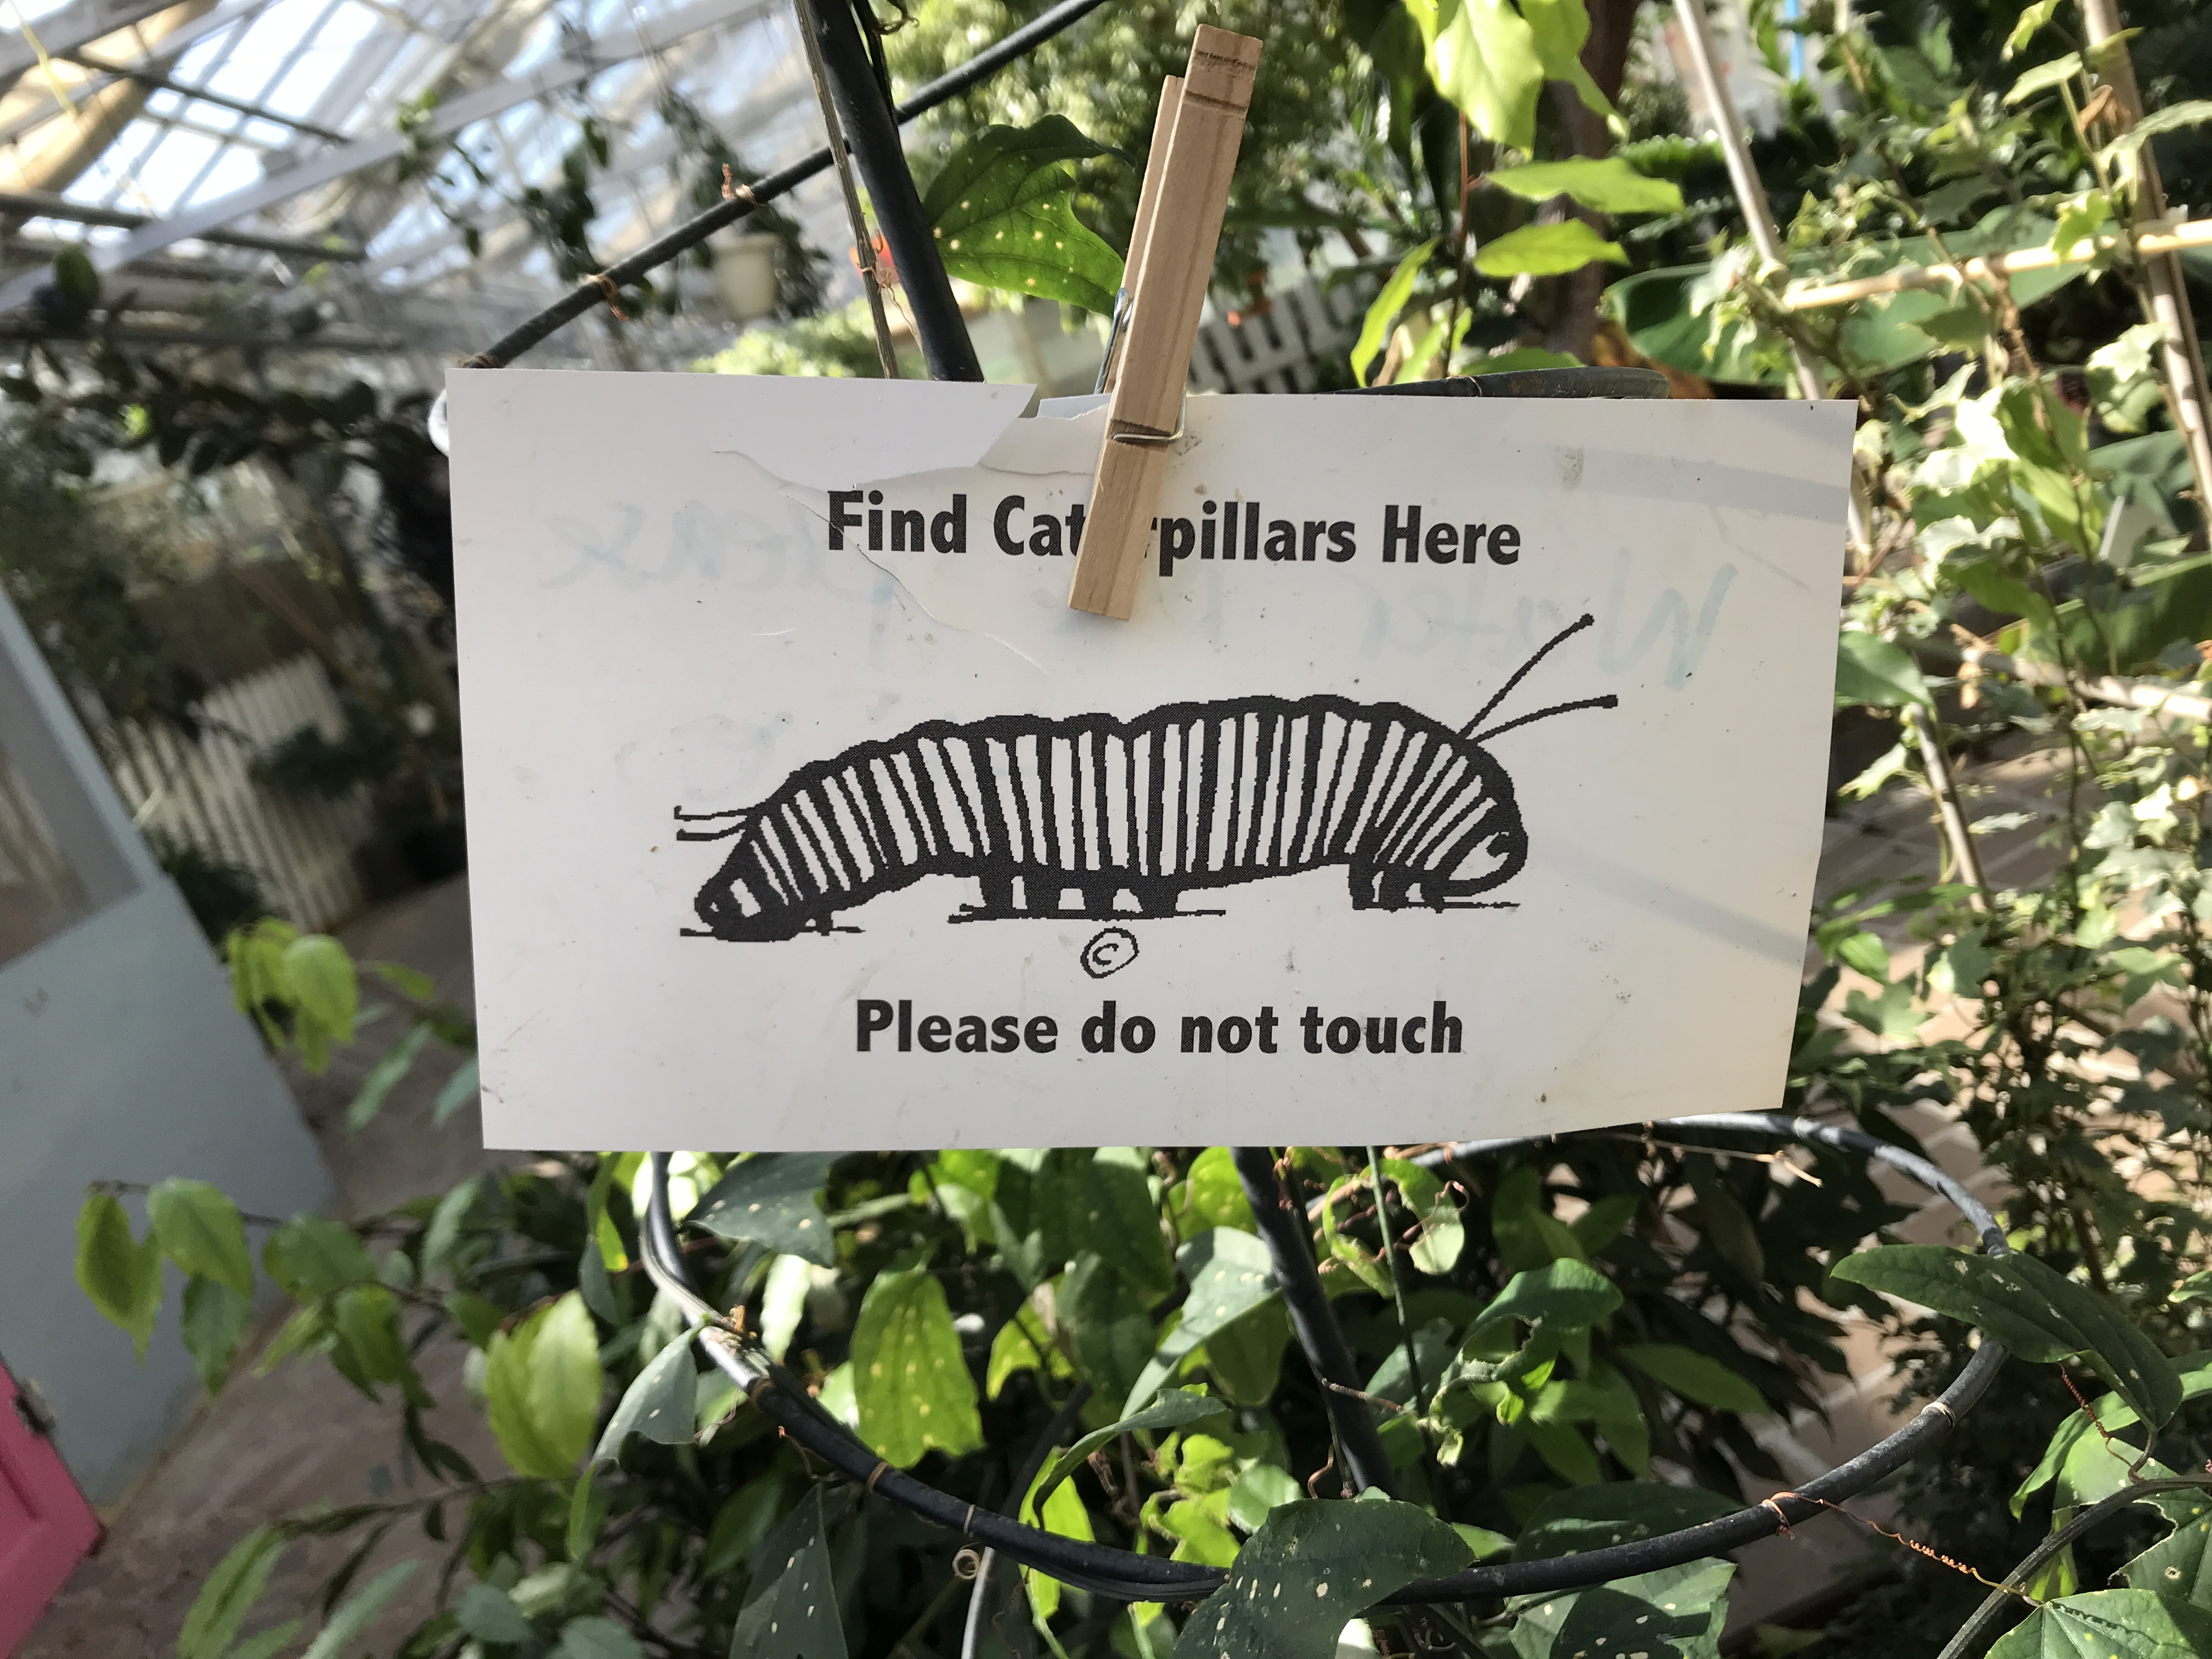 Find Caterpillars Here - Please do not touch